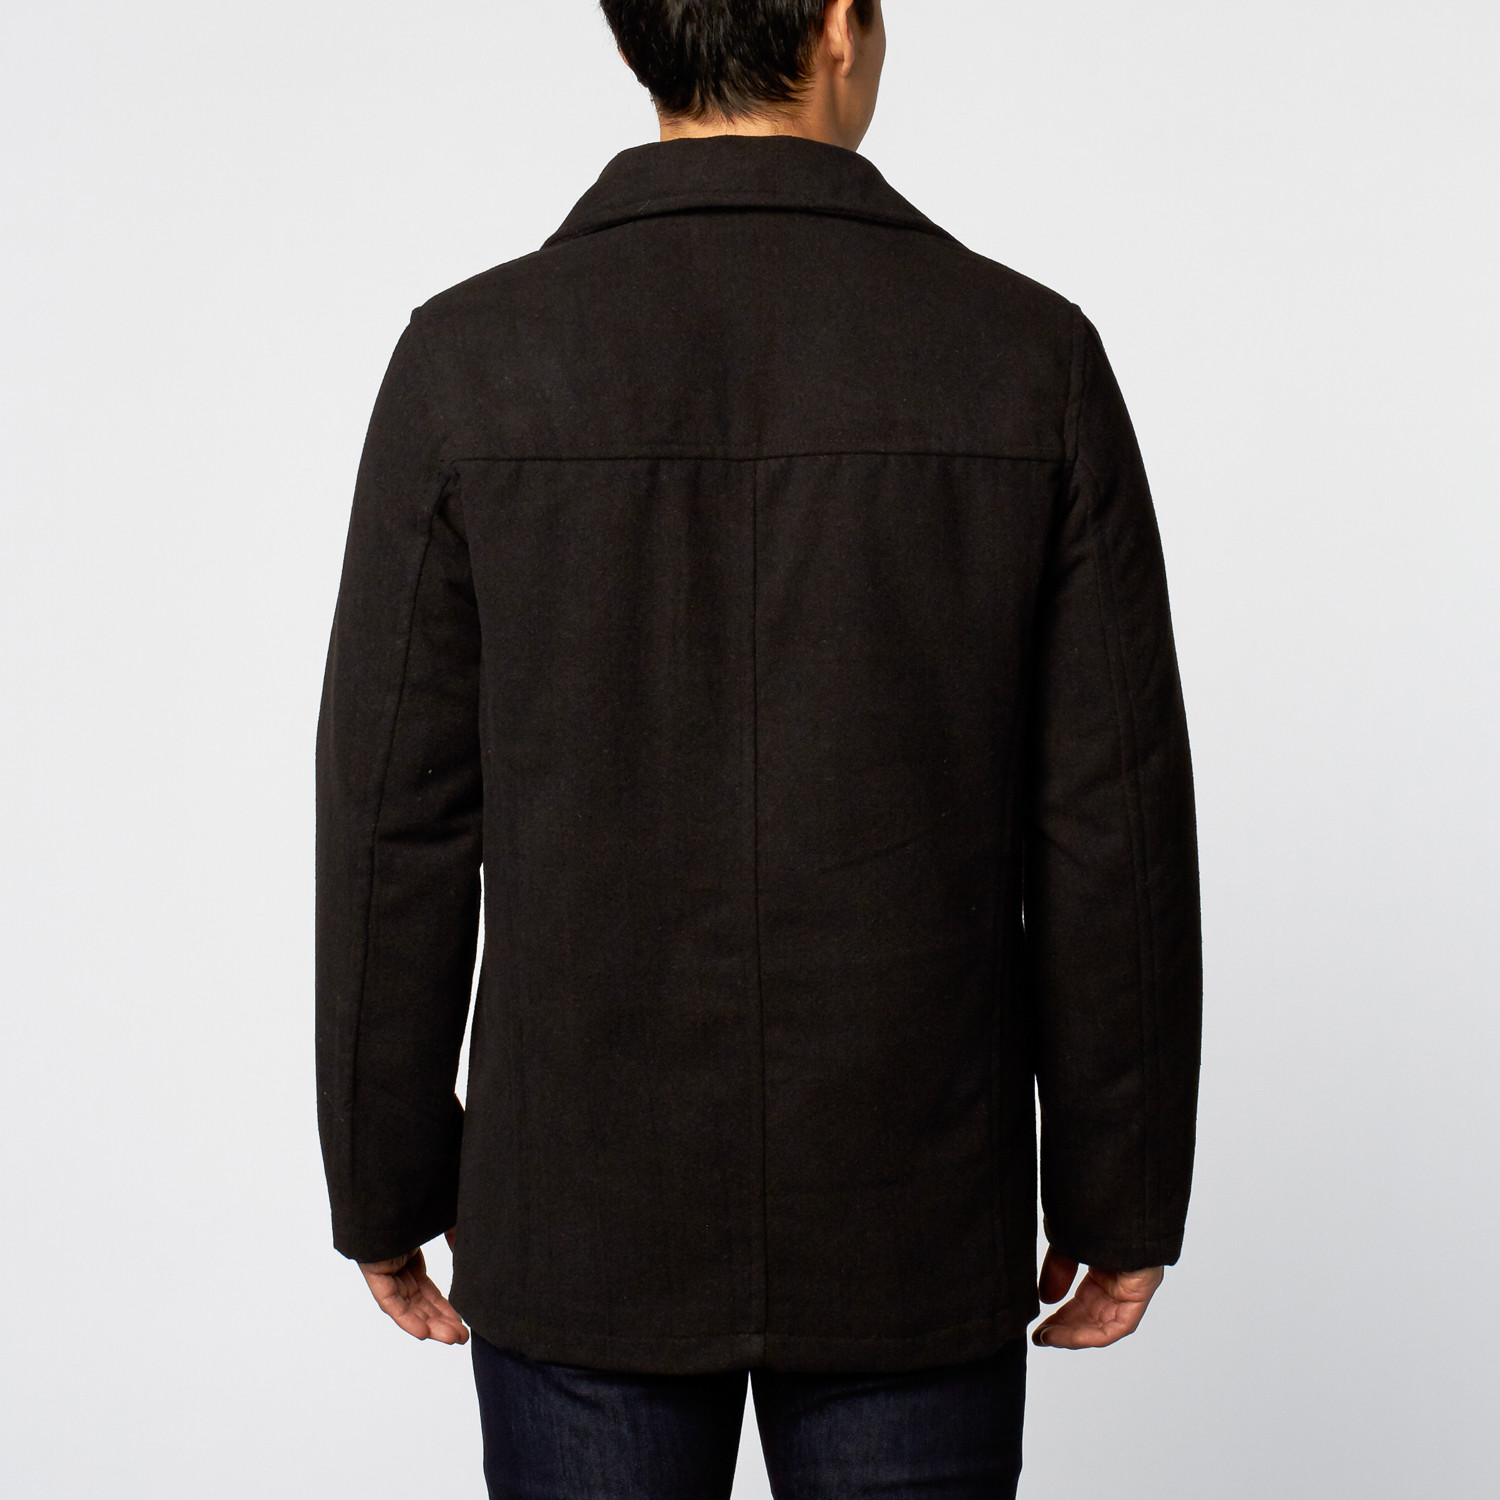 Classic Peacoat // Black (M) - Excelled Apparel - Touch of Modern